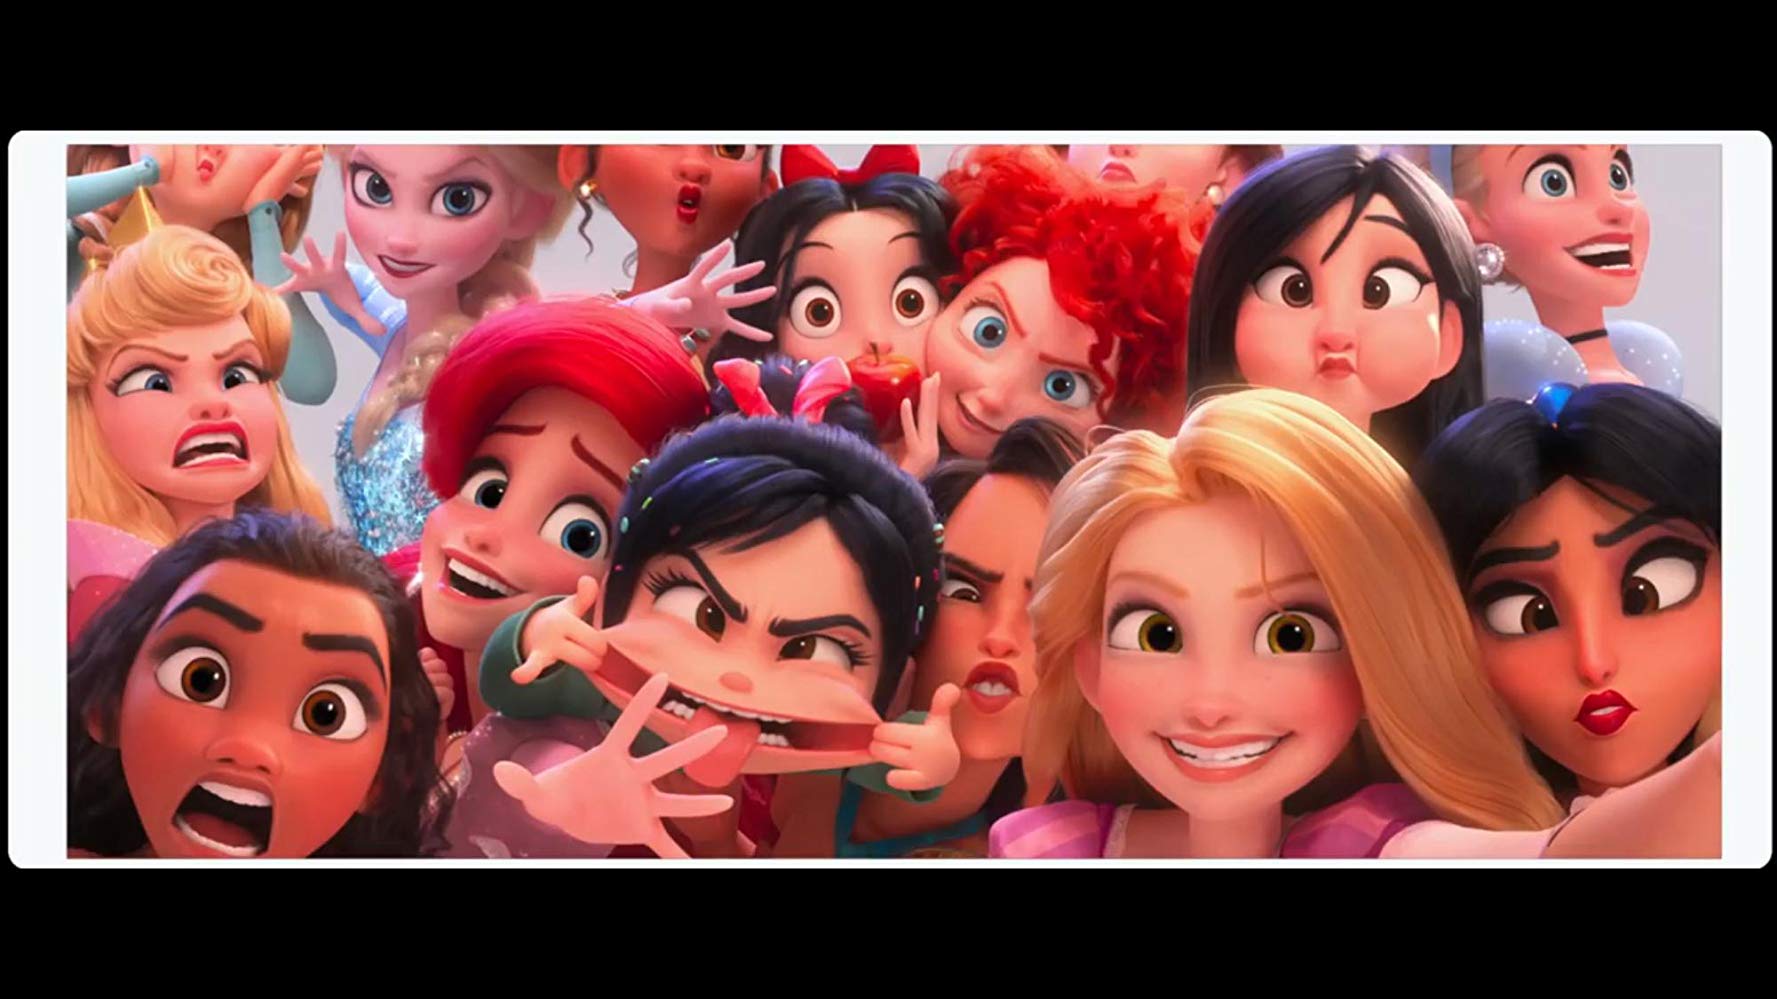 A polaroid picture of all Disney Princesses, taken from Ralph Breaks The Internet.